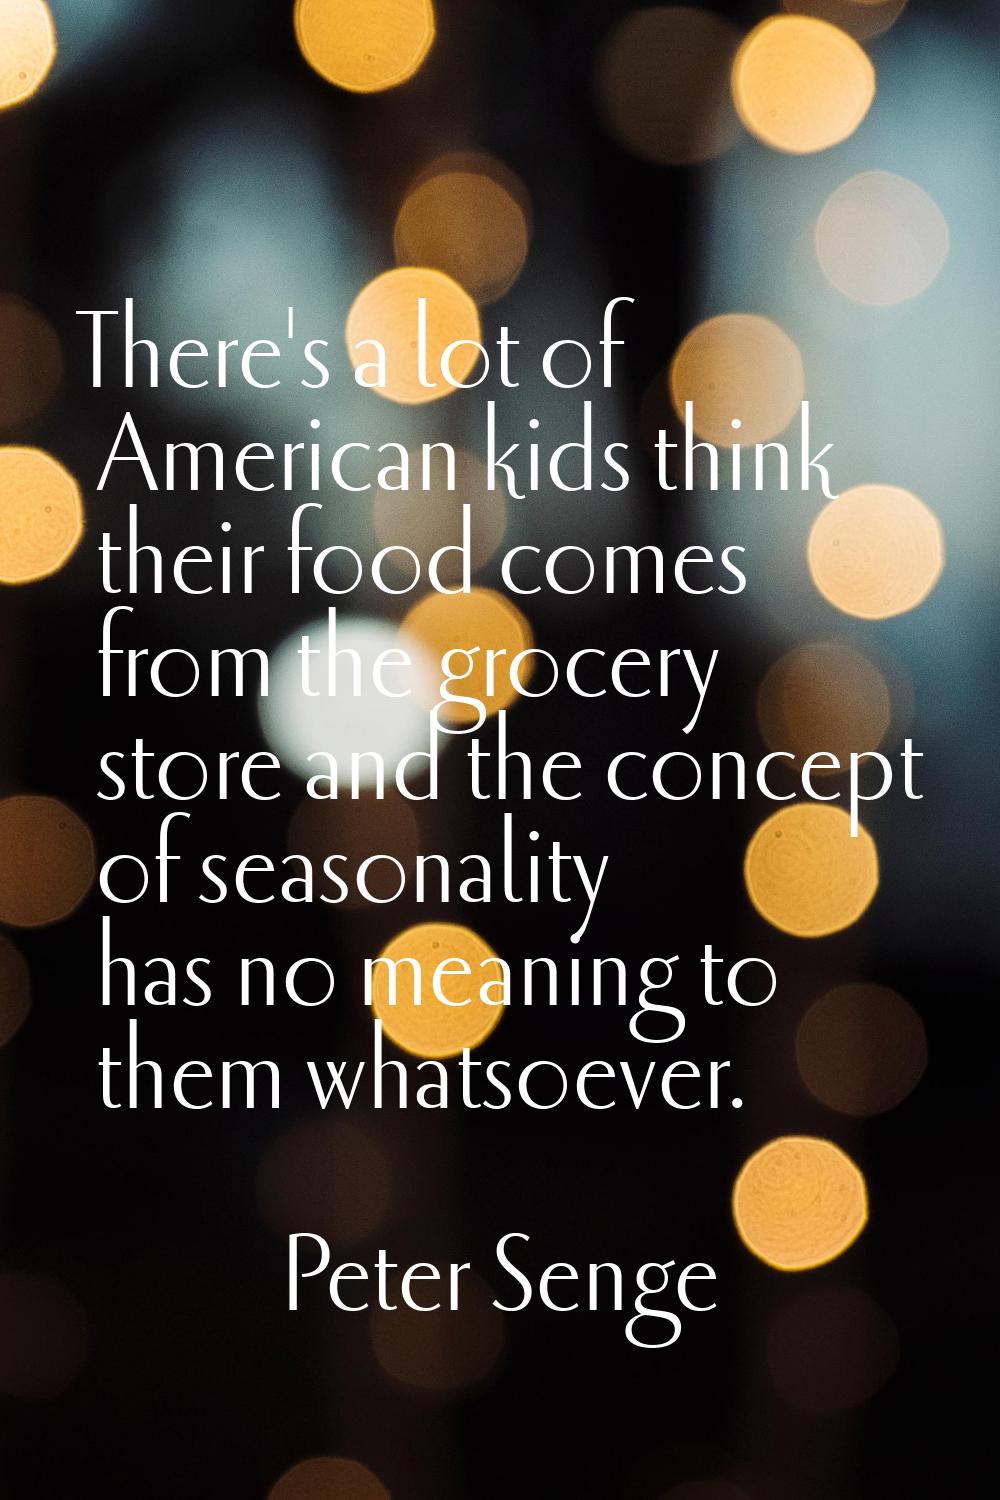 There's a lot of American kids think their food comes from the grocery store and the concept of sea